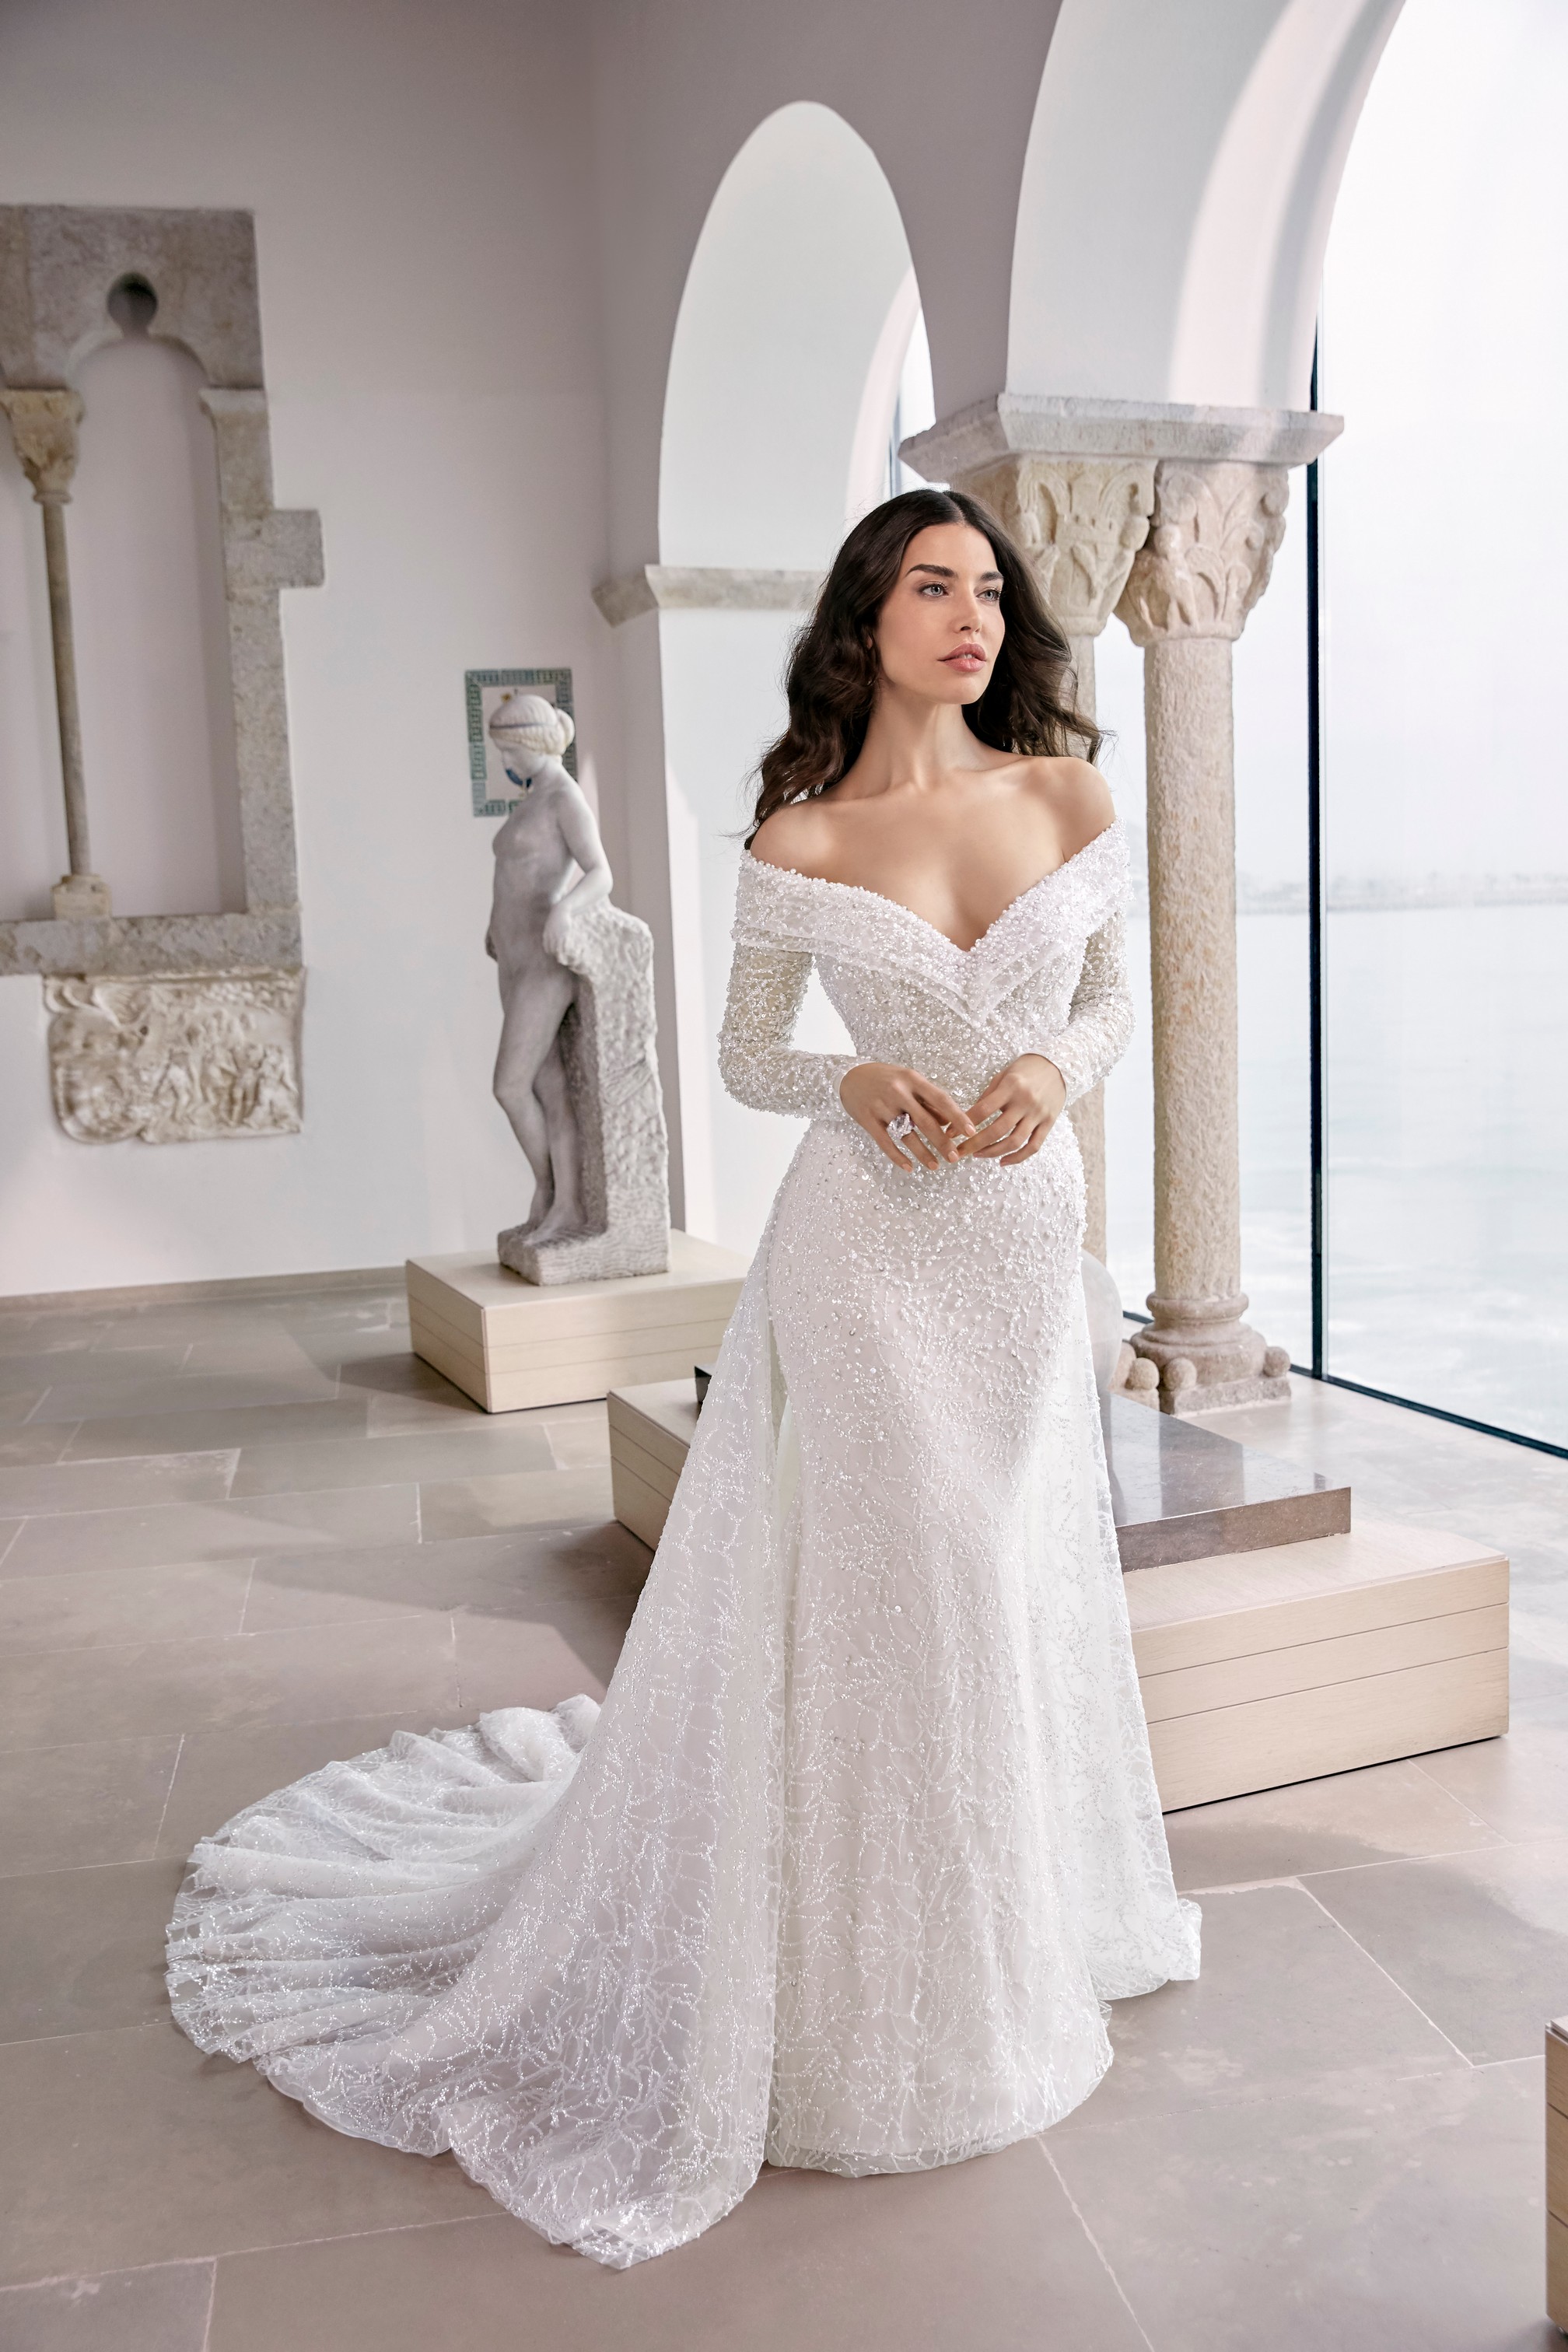 Model stood by statues in Ronald Joyce 69659, a heavily beaded wedding dress with an off the shoulder v-neckline, collar and detachable long sleeves. Model also wears overskirt